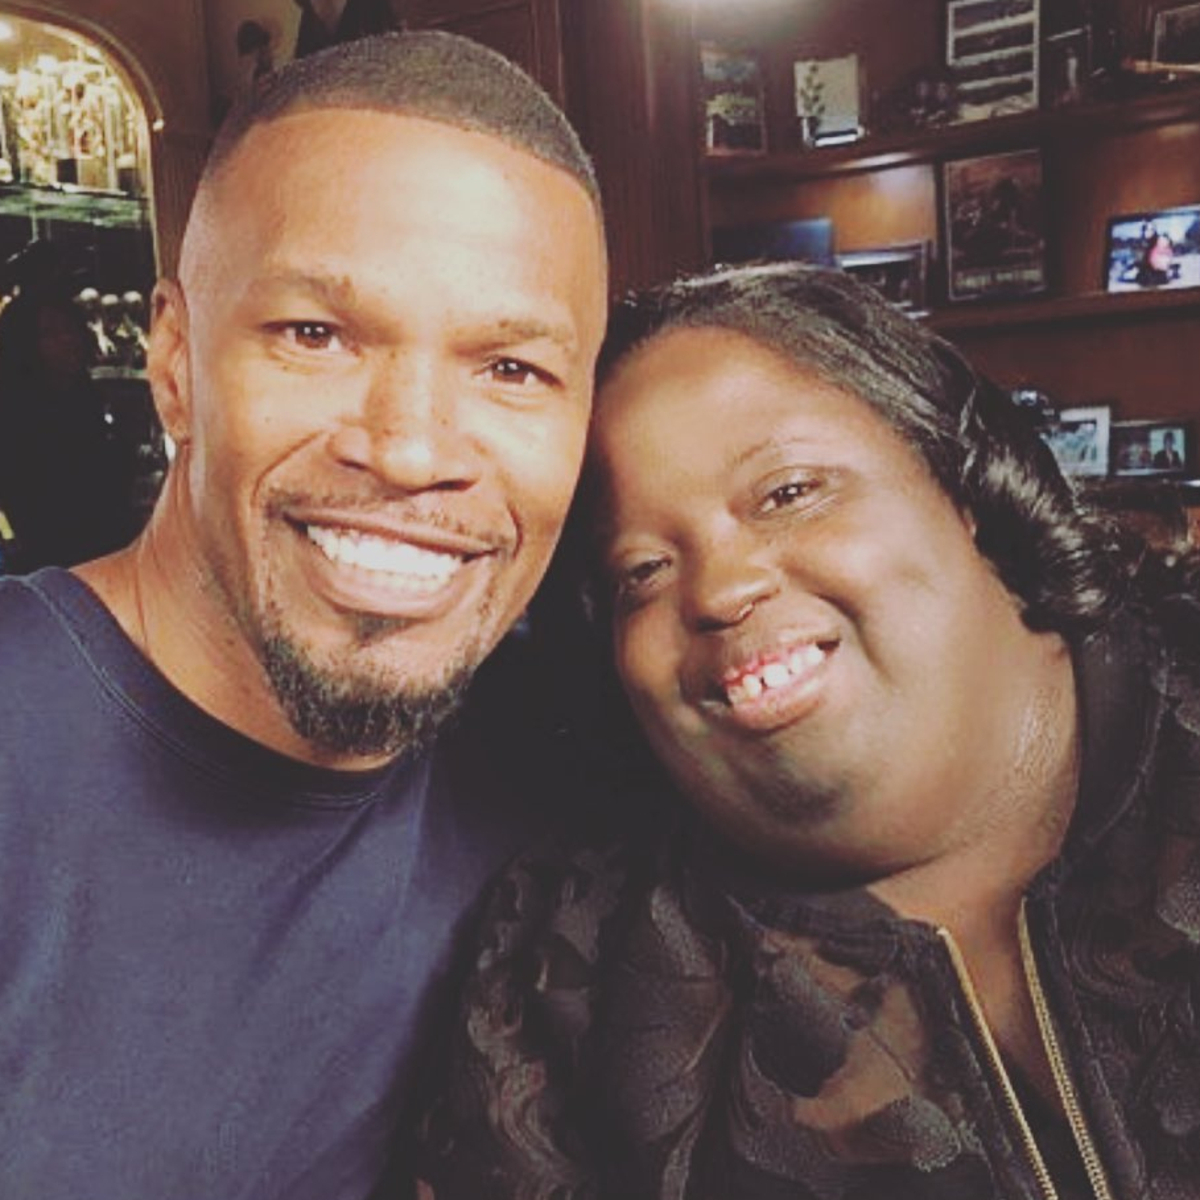 Jamie Foxx’s Tribute to Late Sister Will Make You Smile Through Tears